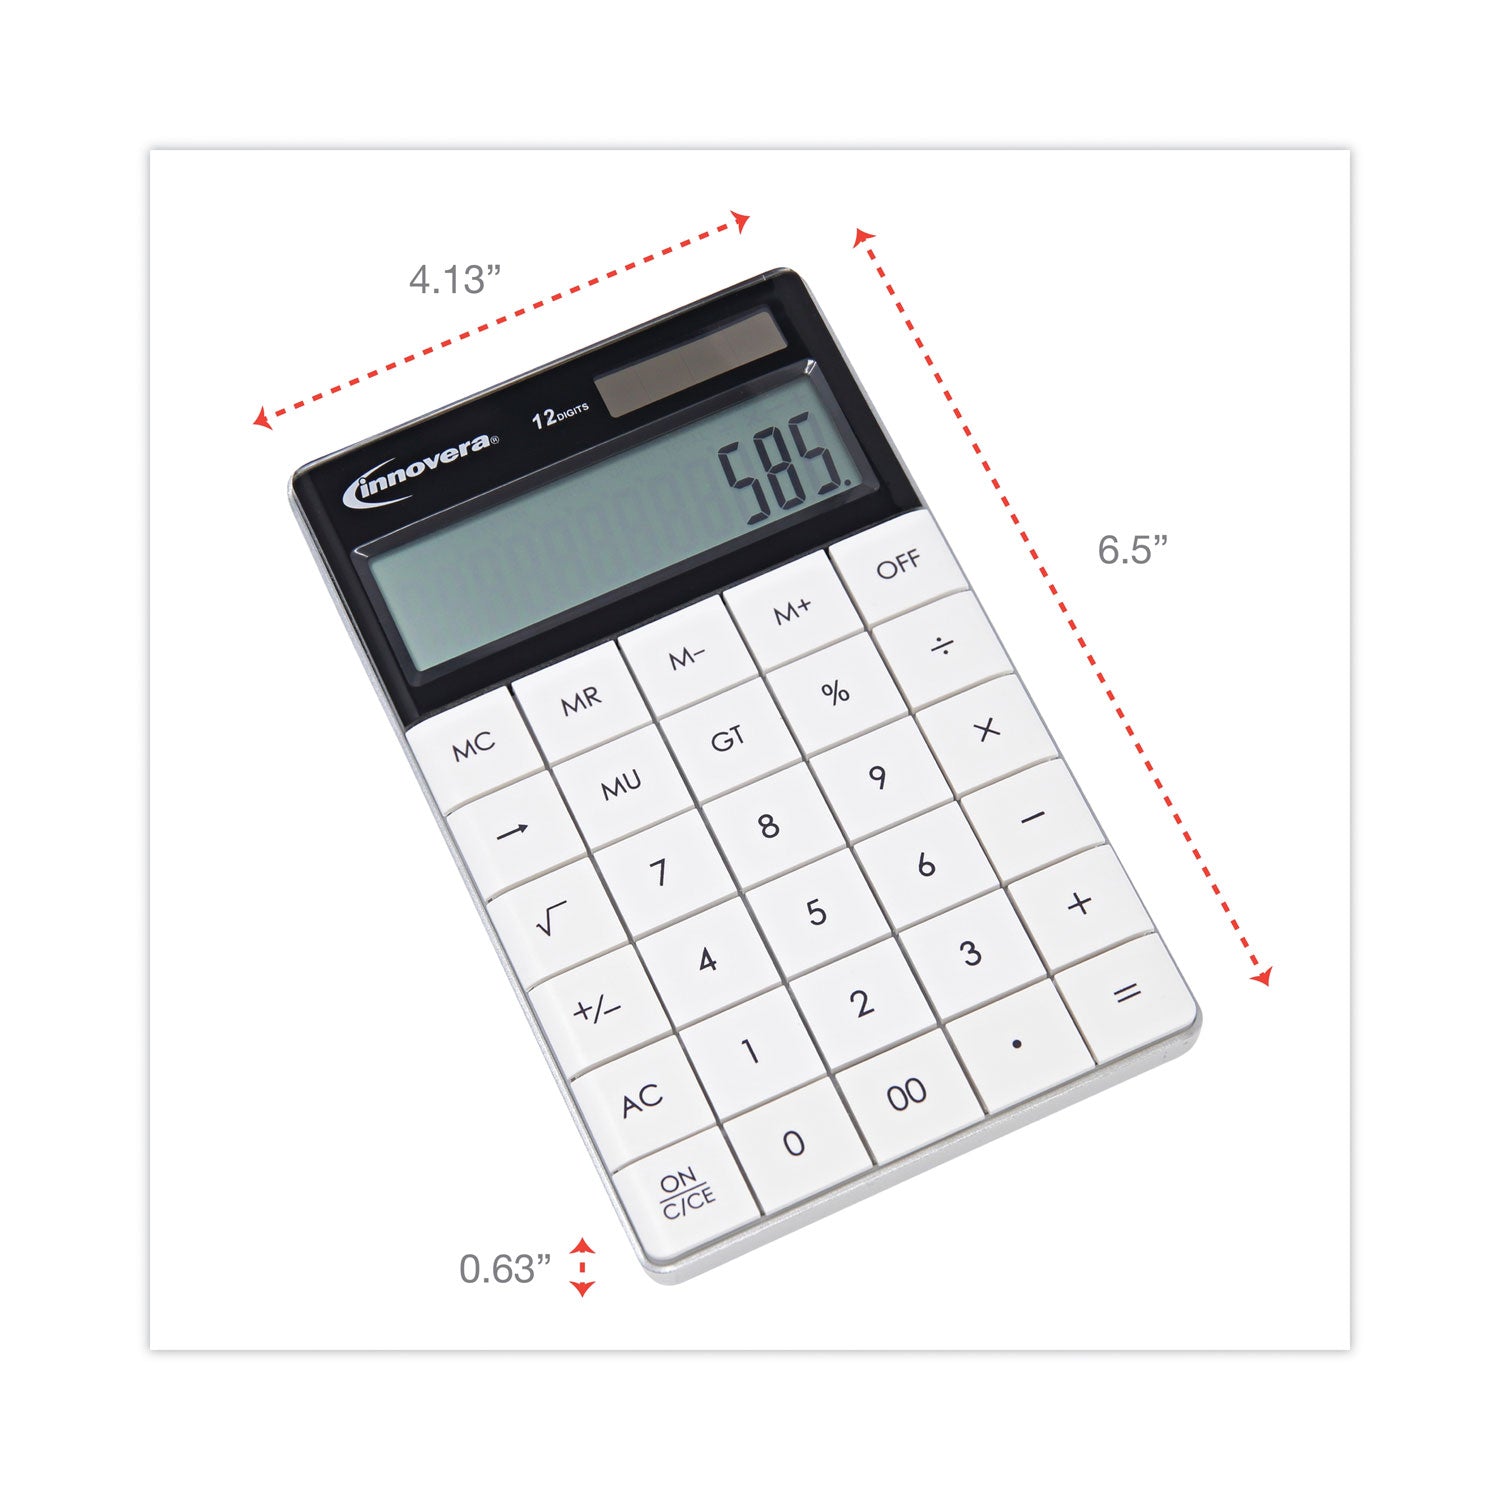 15973-large-button-calculator-12-digit-lcd_ivr15973 - 2